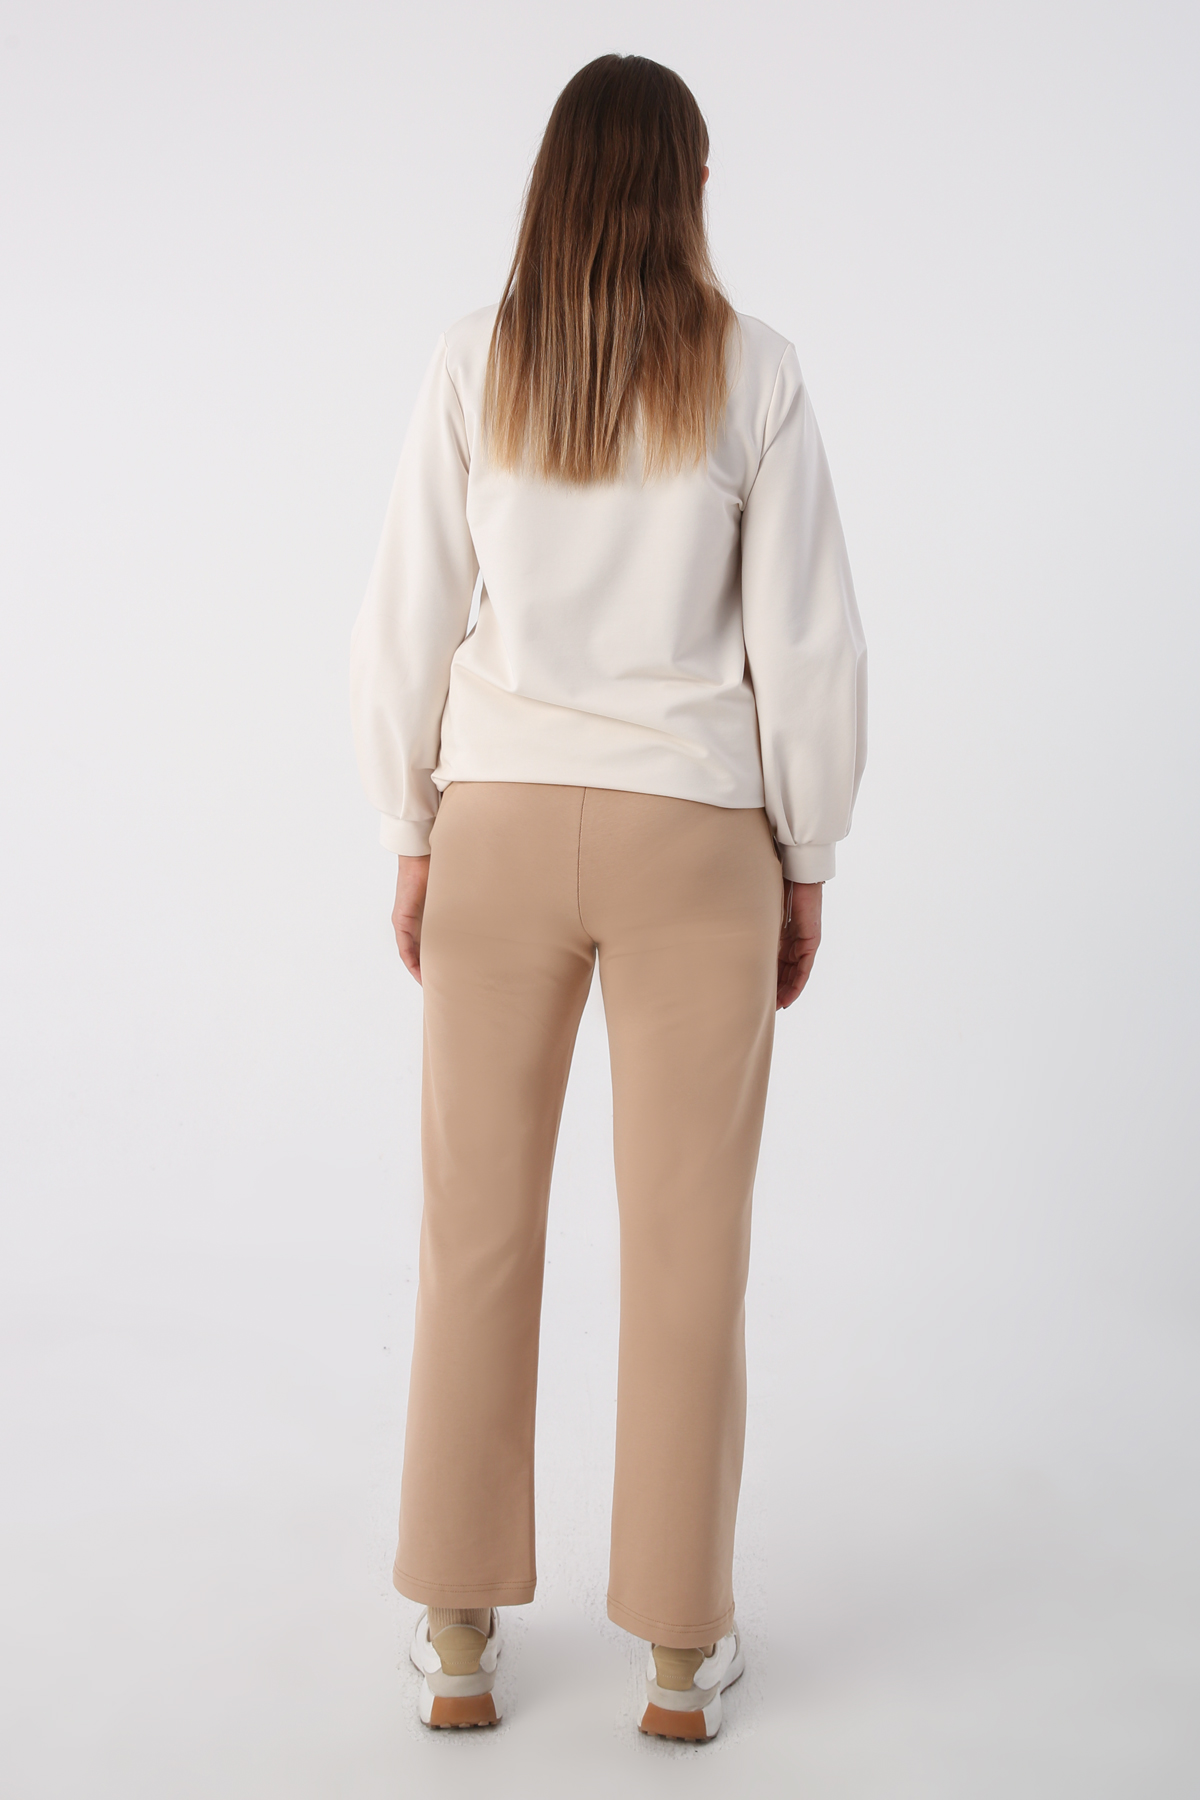 A model wears all11675-pocket-sweatpants-beige, wholesale Sweatpants of Allday to display at Lonca